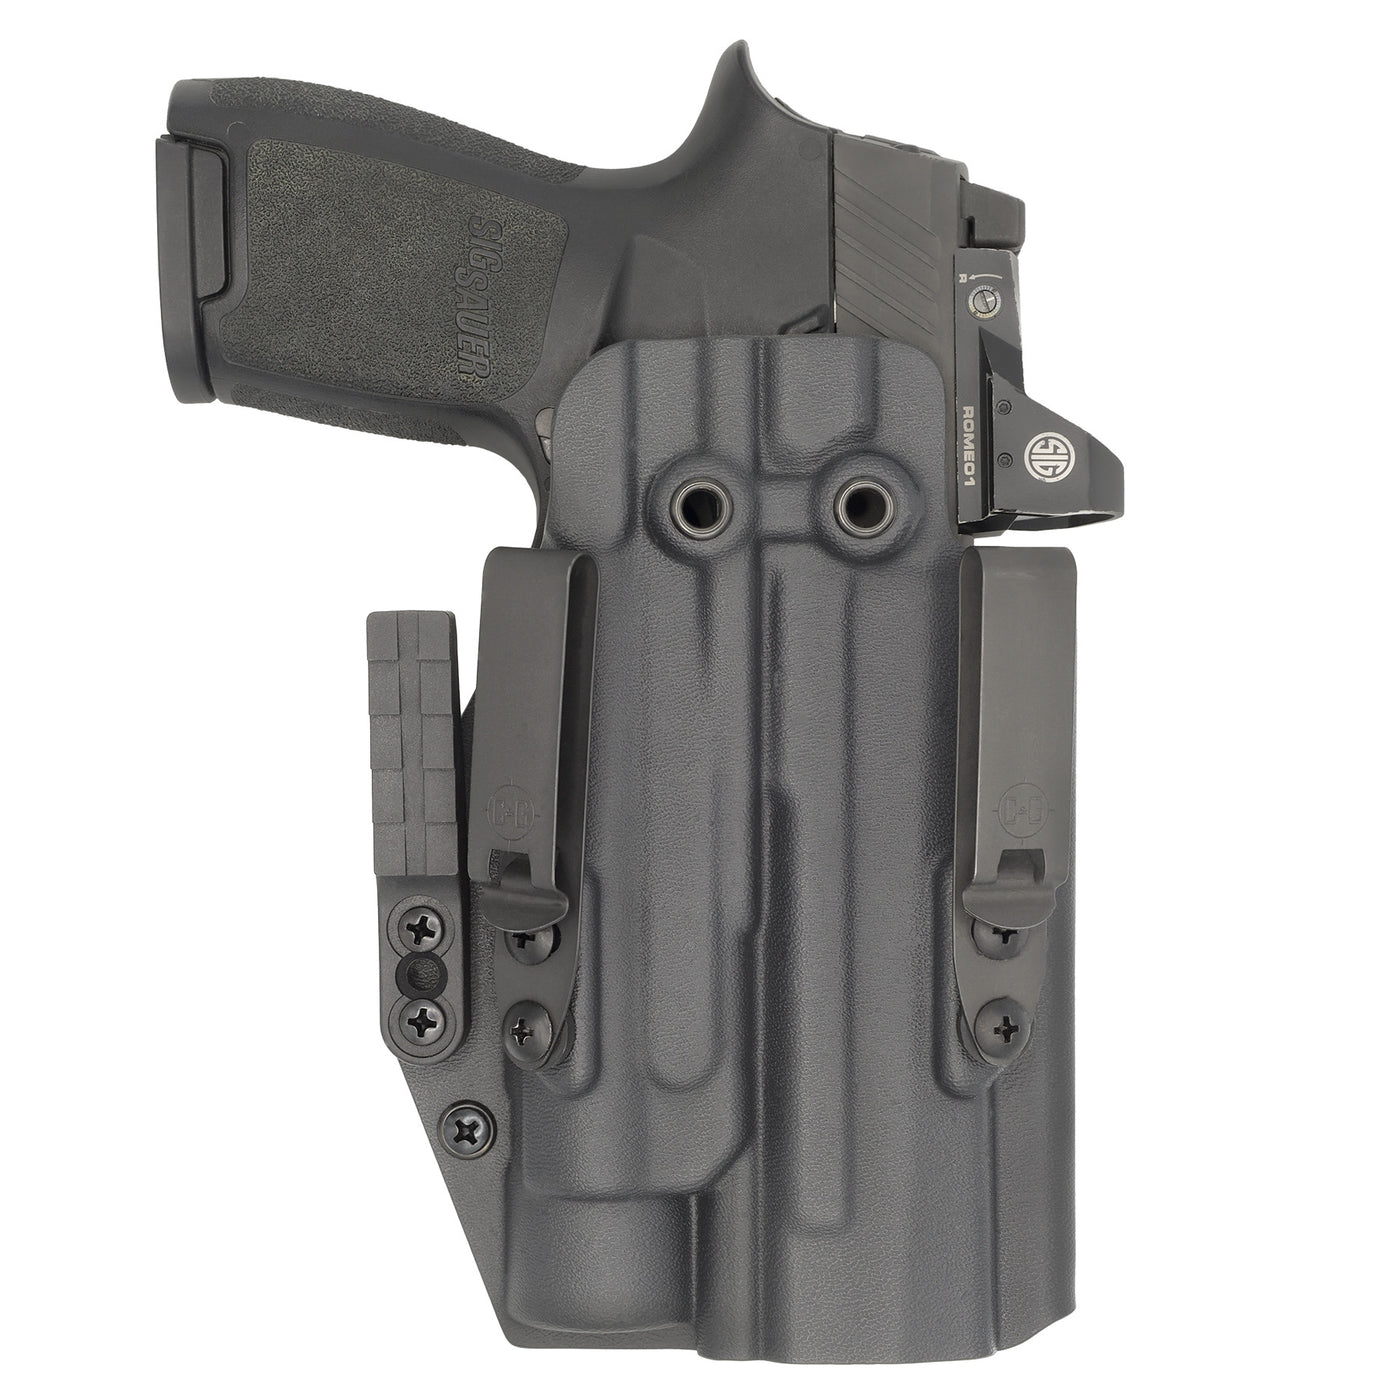 C&G Holsters custom IWB Tactical ALPHA UPGRADE Springfield XD-M Elite Streamlight TLR1 in holstered position